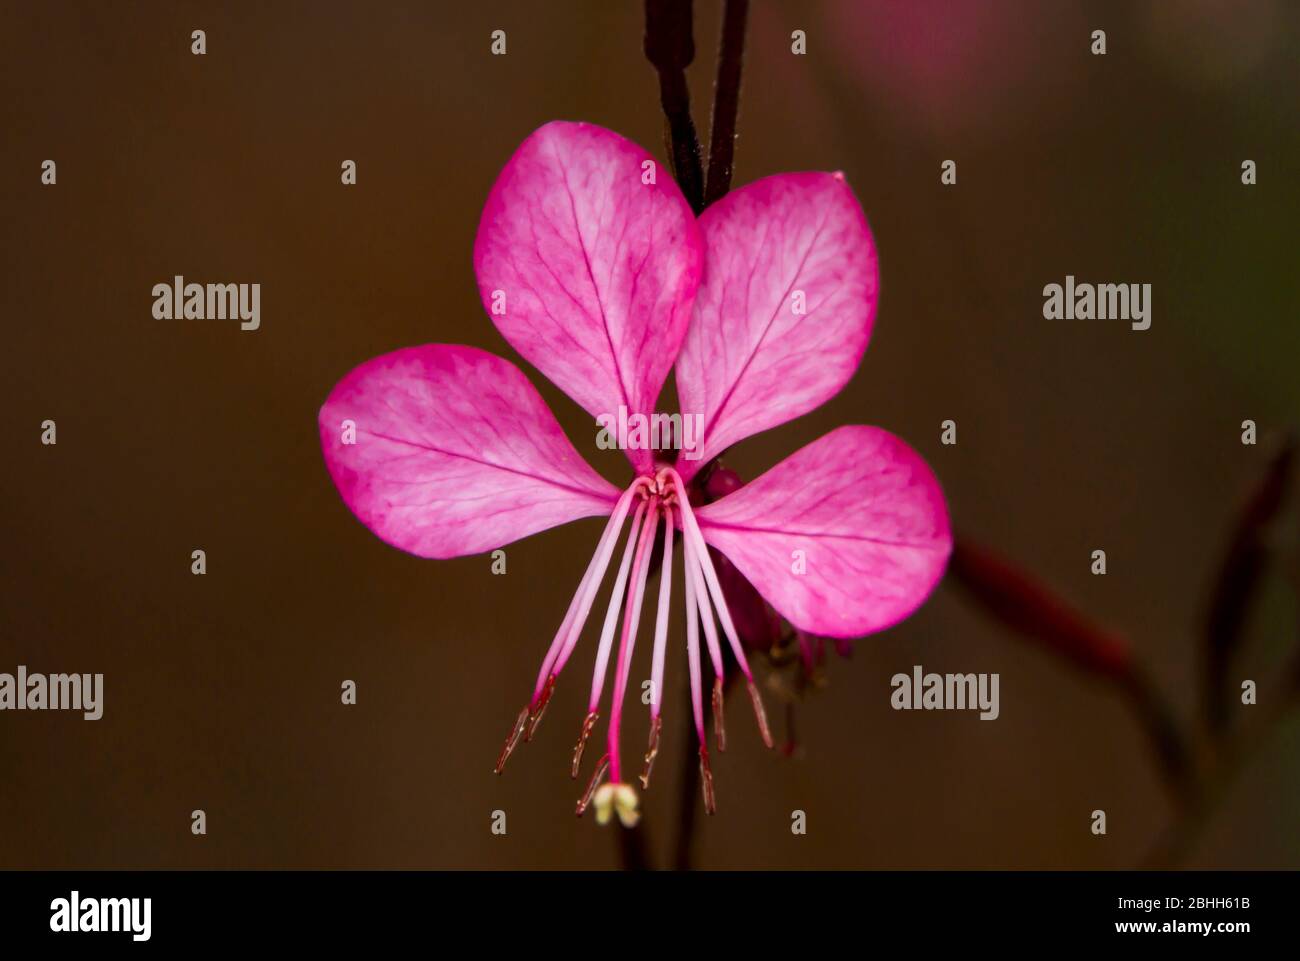 pink flower close up Stock Photo